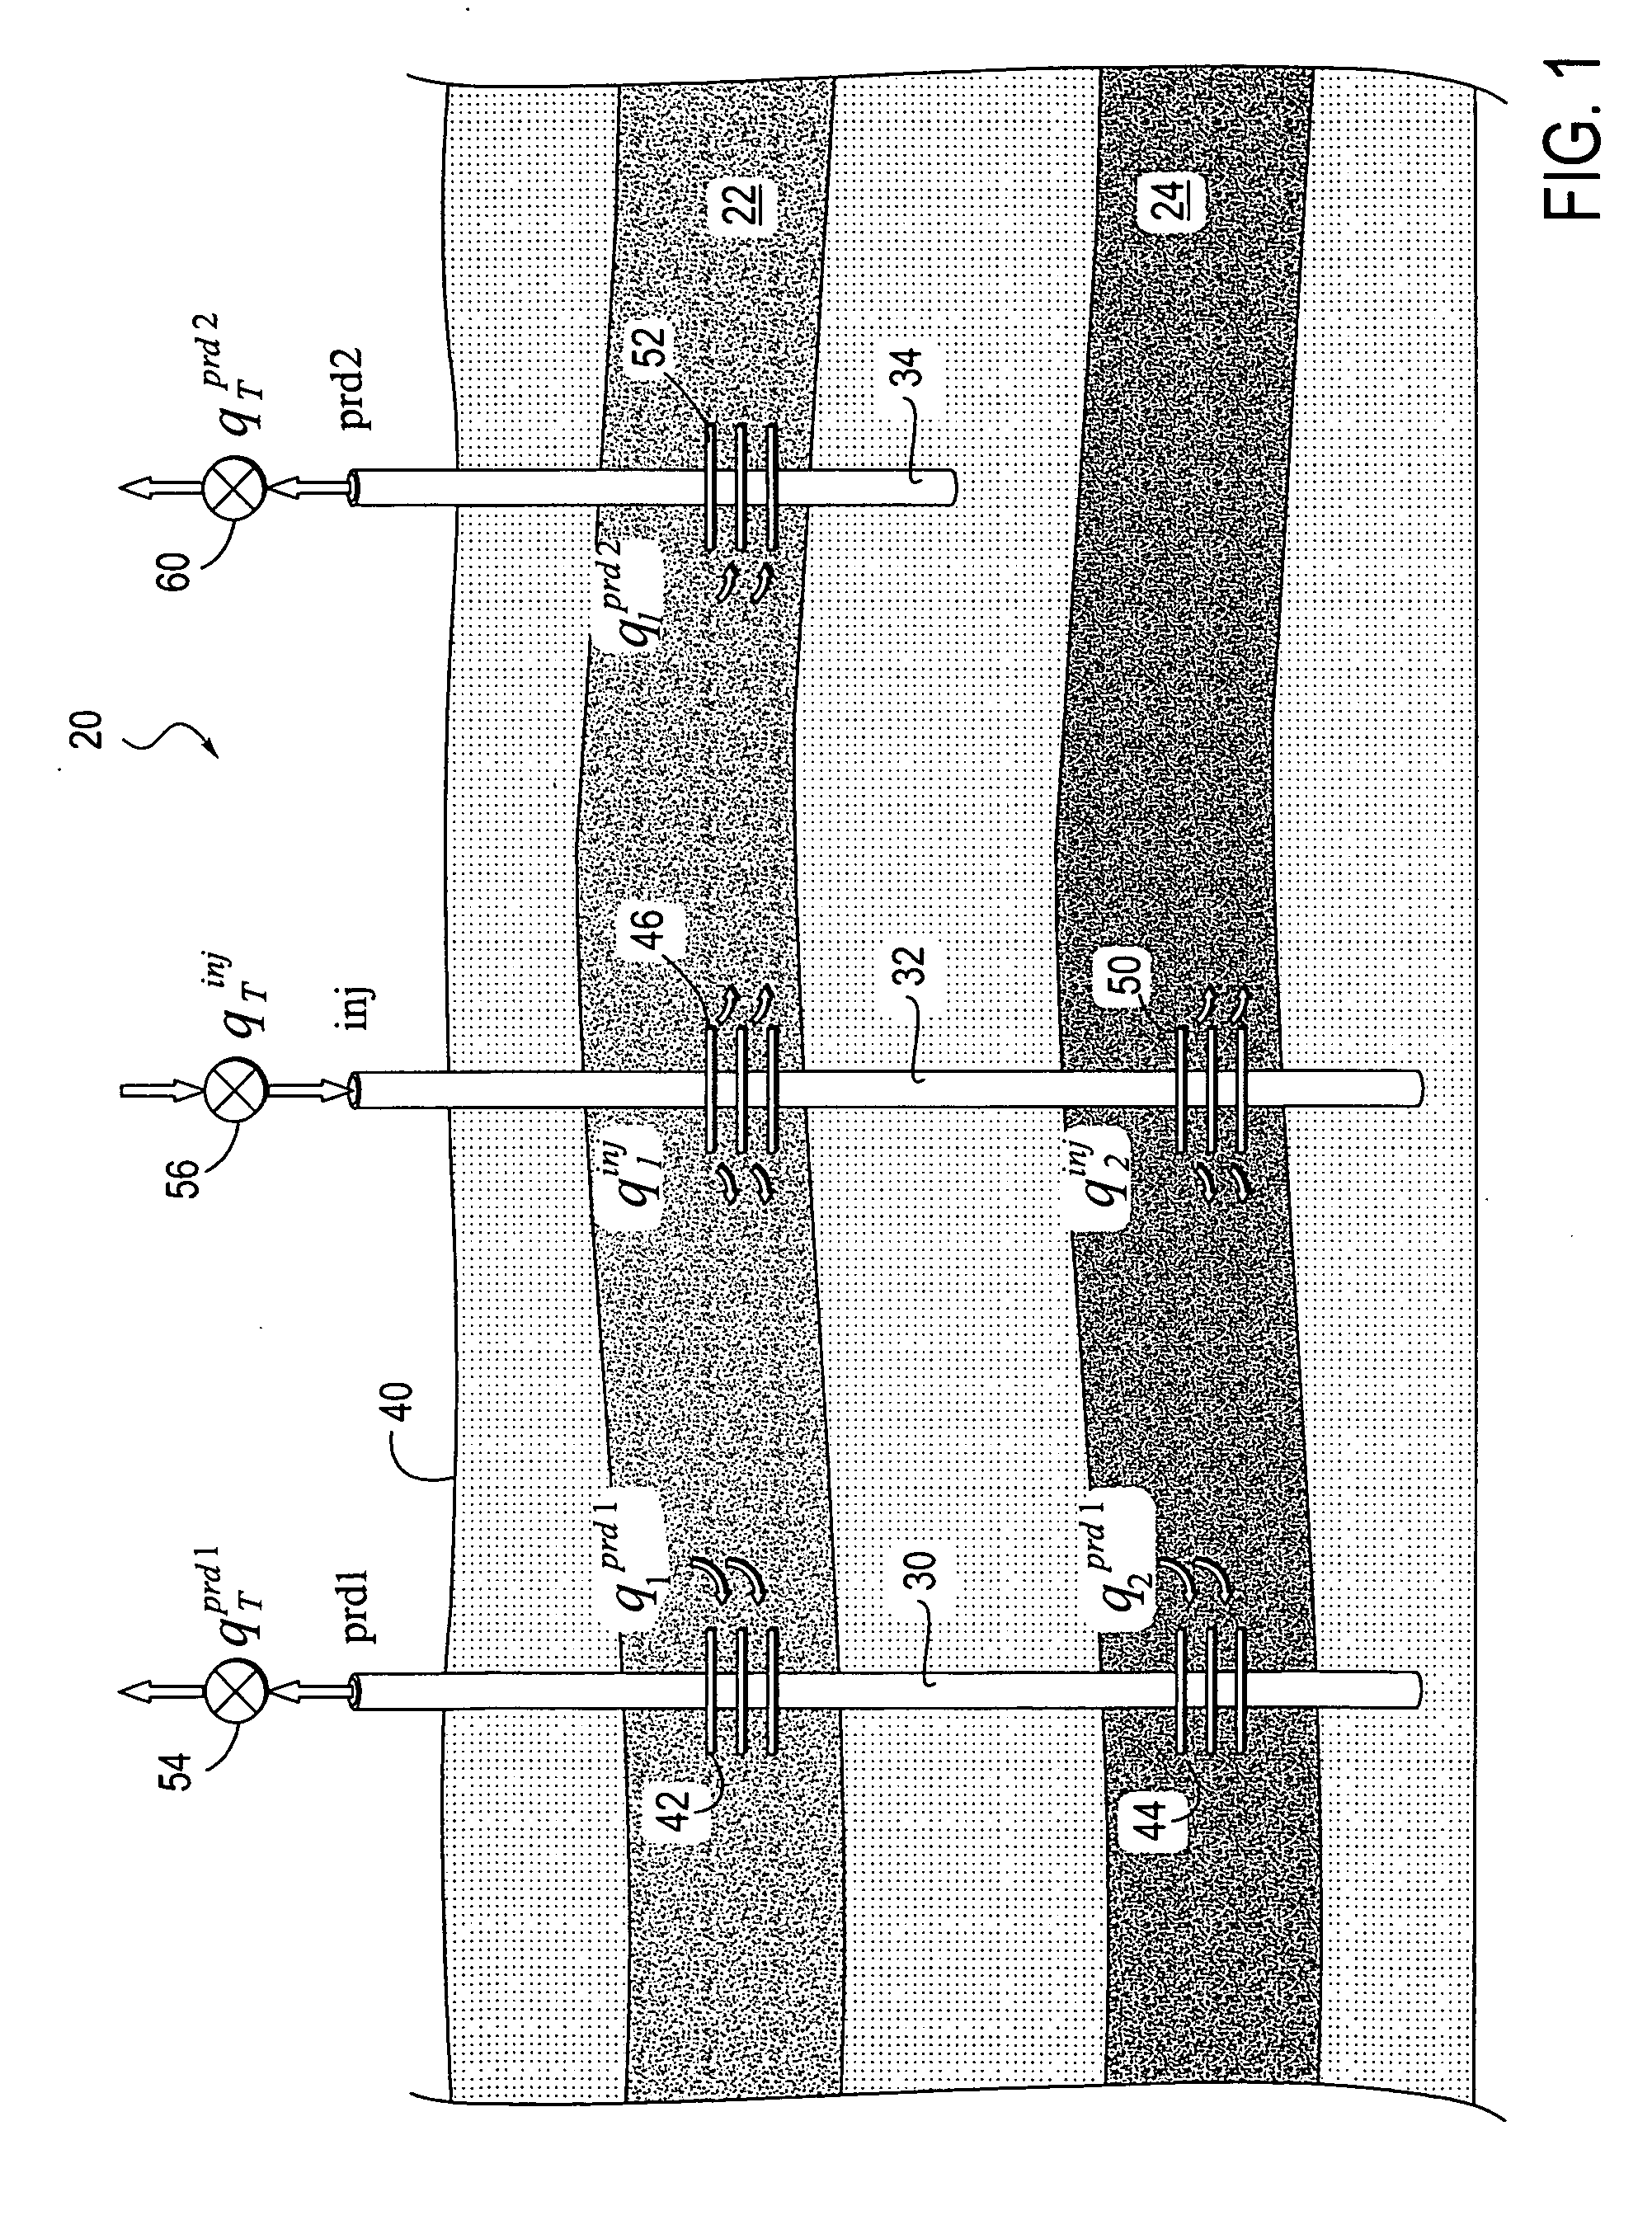 Method for field scale production optimization by enhancing the allocation of well flow rates